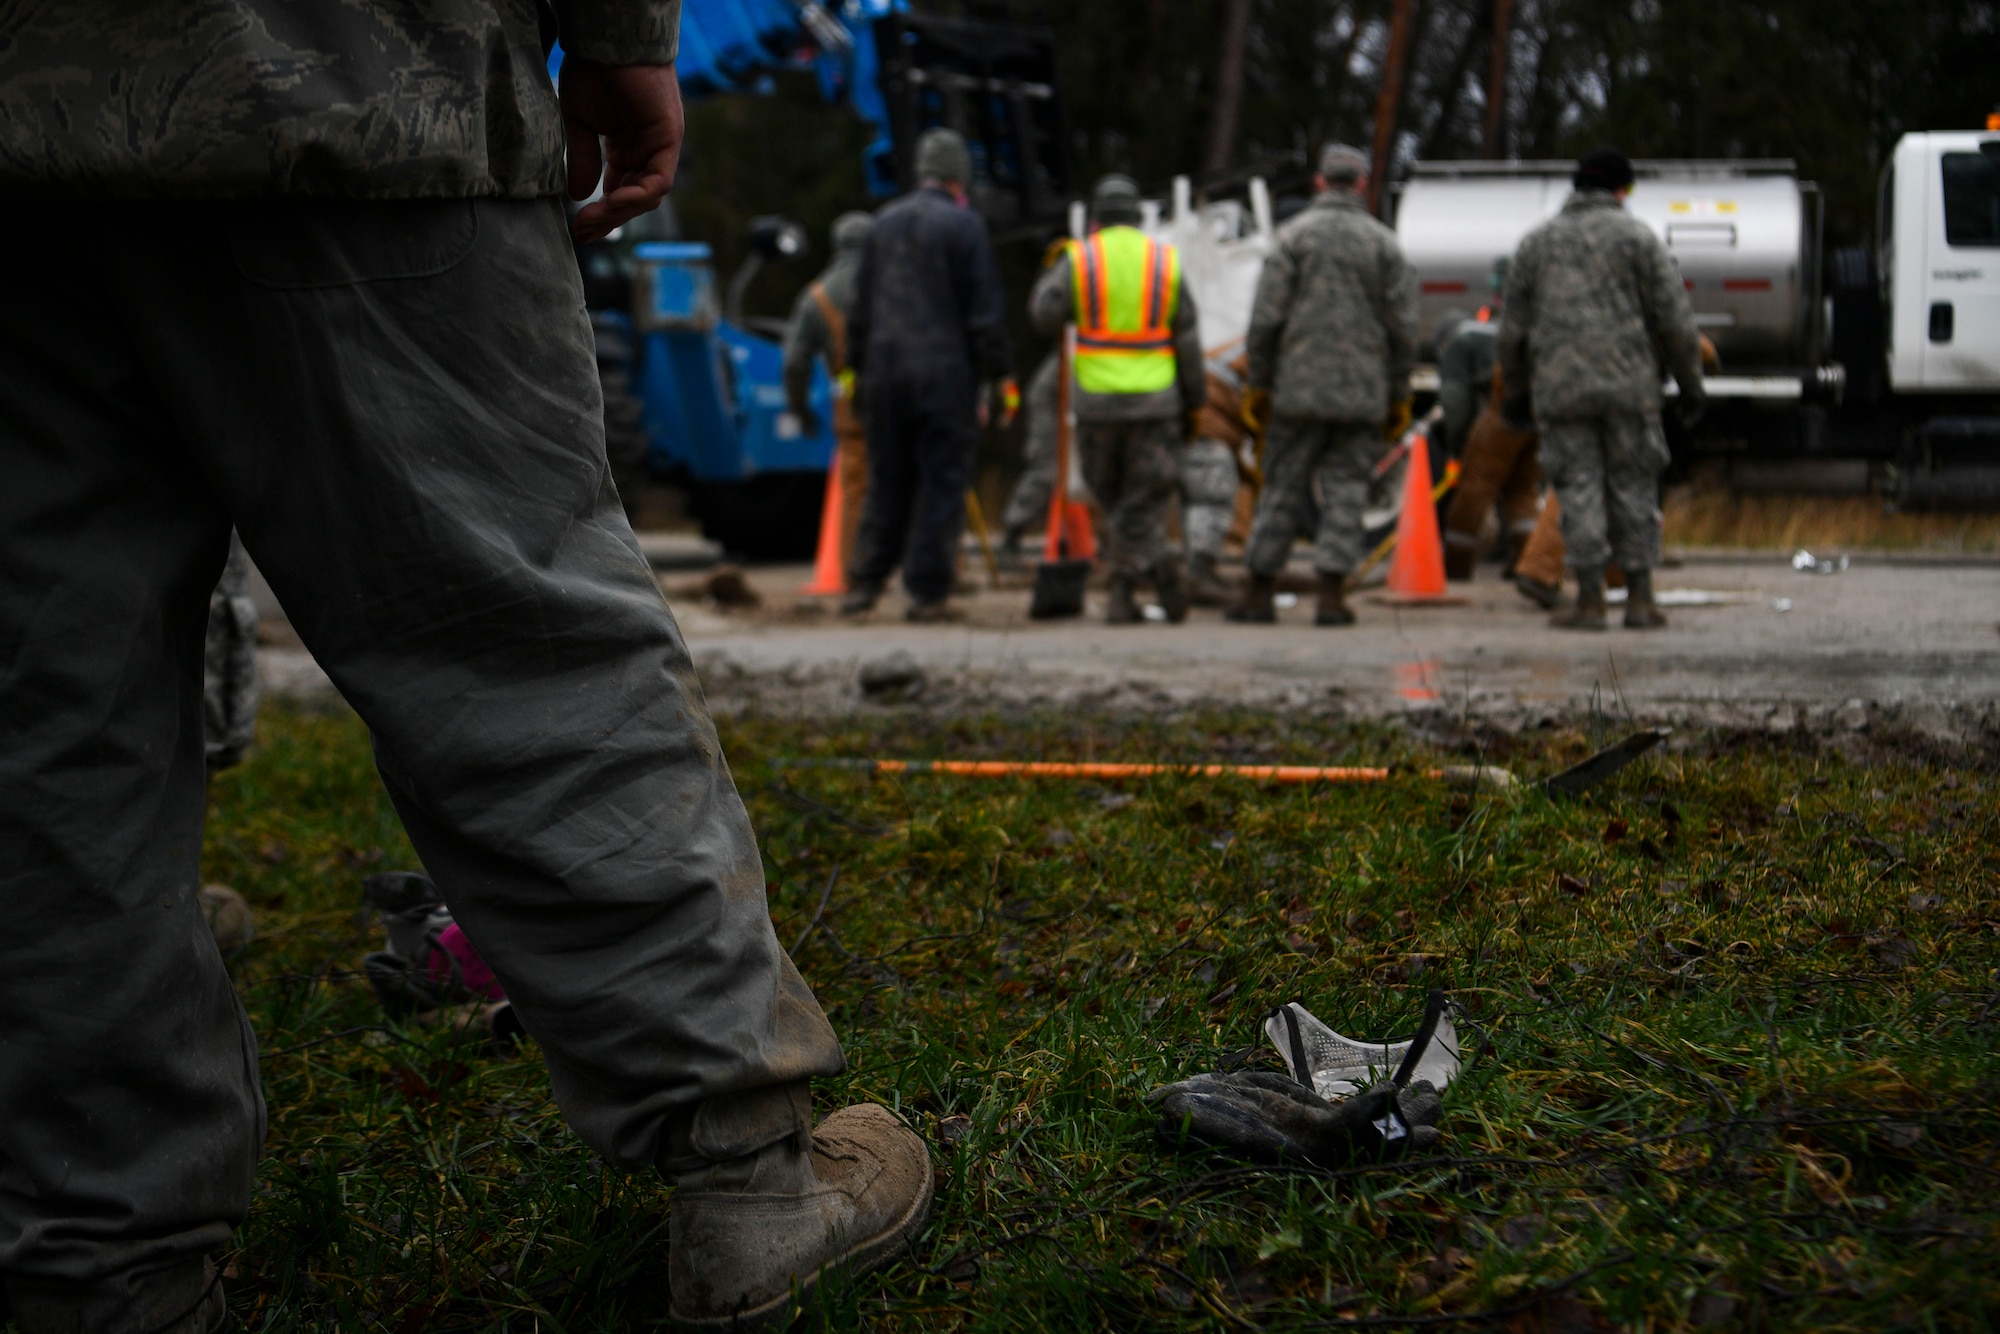 A U.S. Airman watches as his counterparts fill a hole in the runway during a Rapid Airfield Damage Repair training exercise on Ramstein Air Base, Germany, Jan. 25, 2018. Airmen would tag in and out of the exercise to rest after mixing flowable fill cement. (U.S. Air Force photo by Senior Airman Devin M. Rumbaugh)